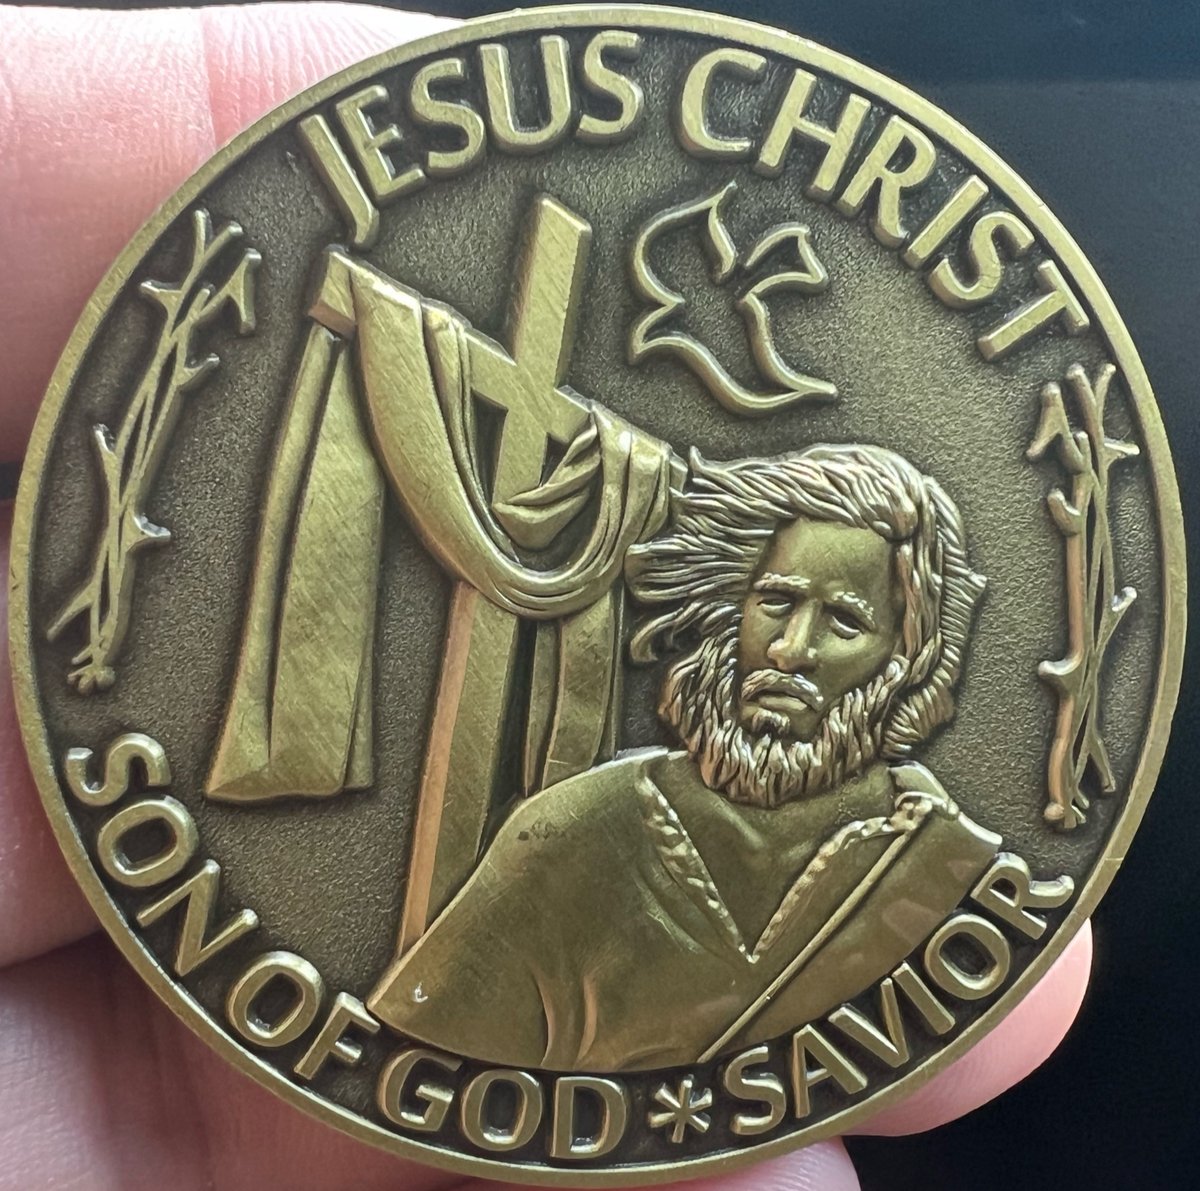 Image of JESUS CHRIST - ACTS 4:12 COIN